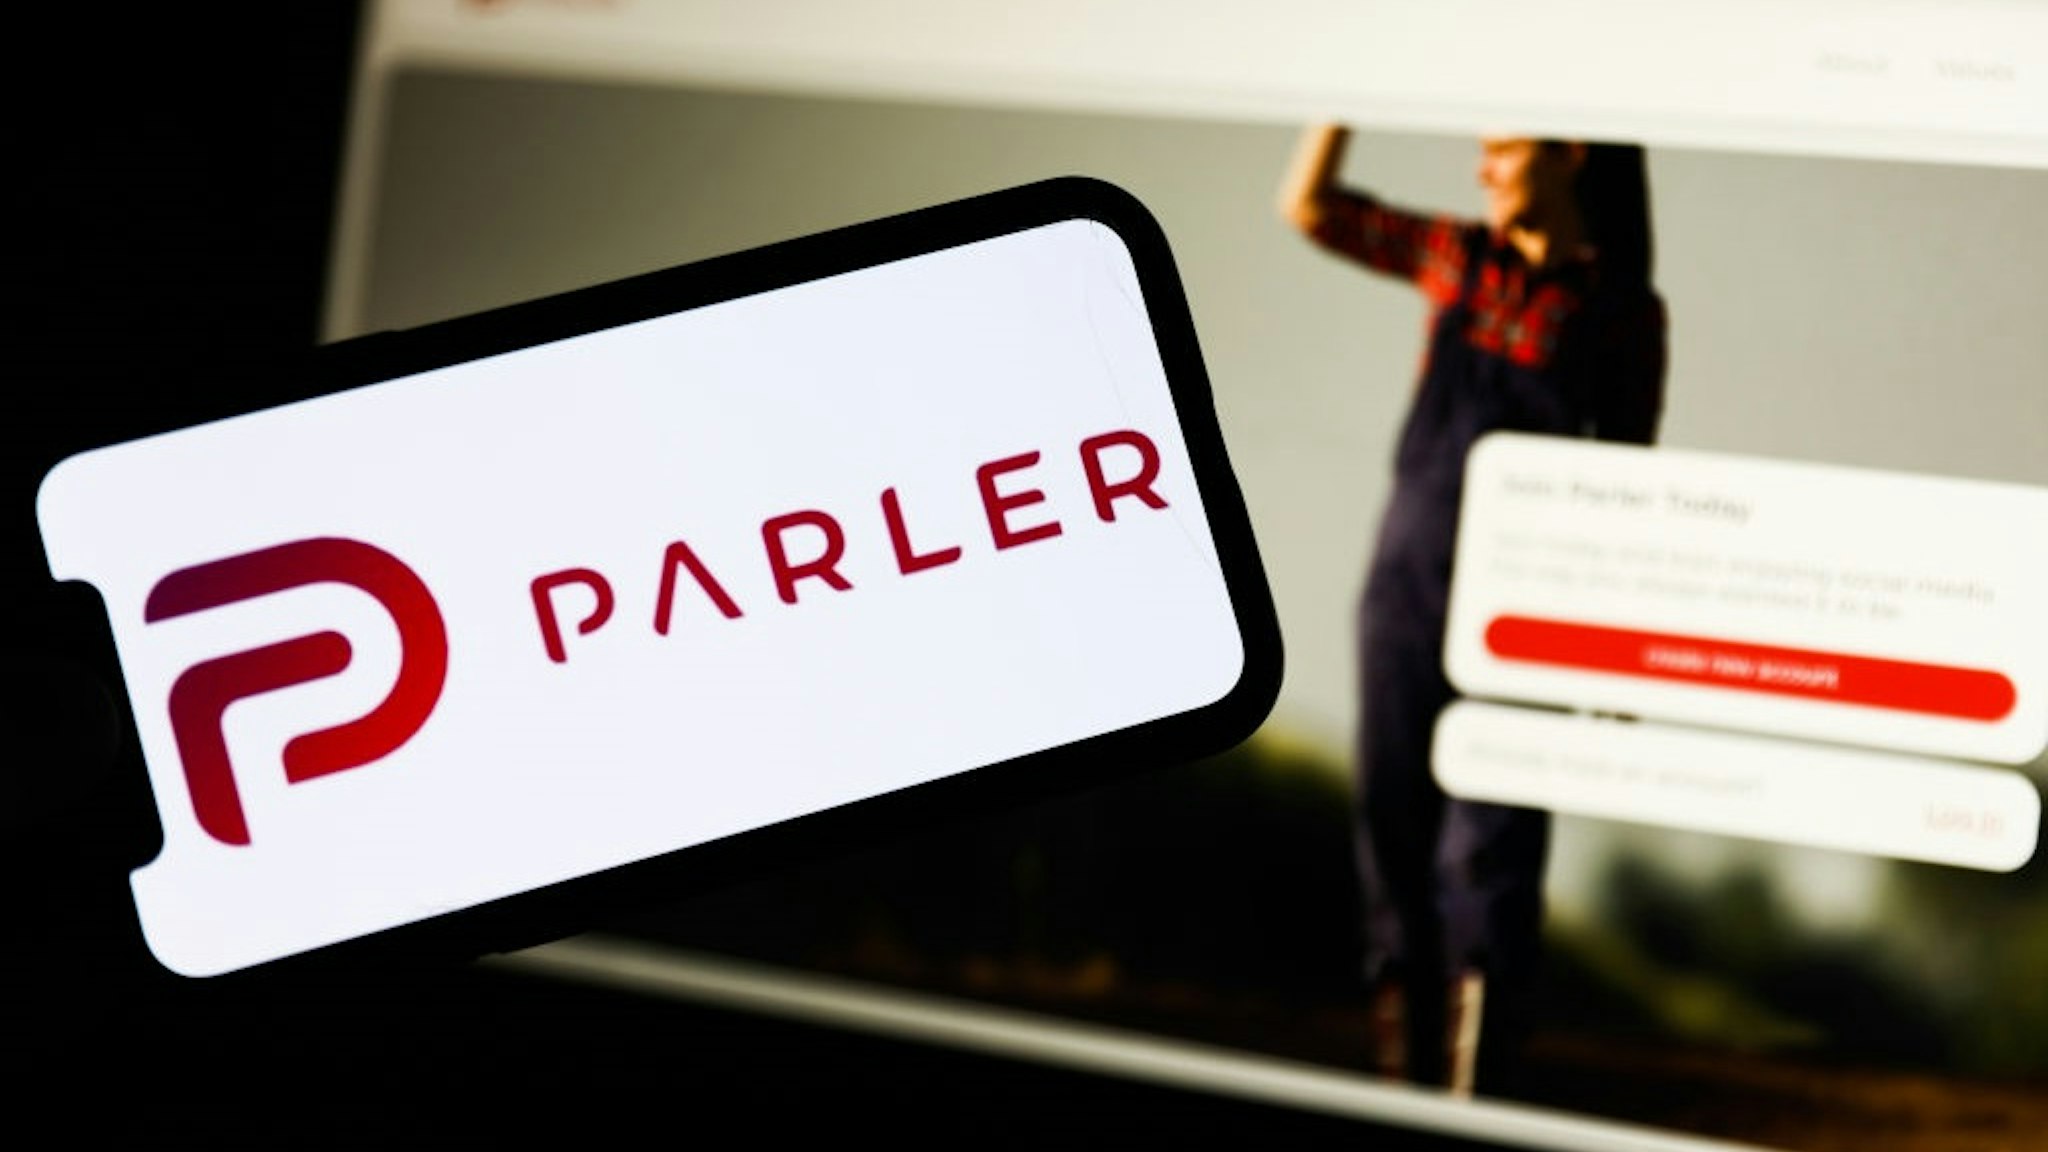 Parler app logo displayed on a phone screen and Parler website displayed on a laptop screen are seen in this illustration photo taken in Poland on January 10, 2020.